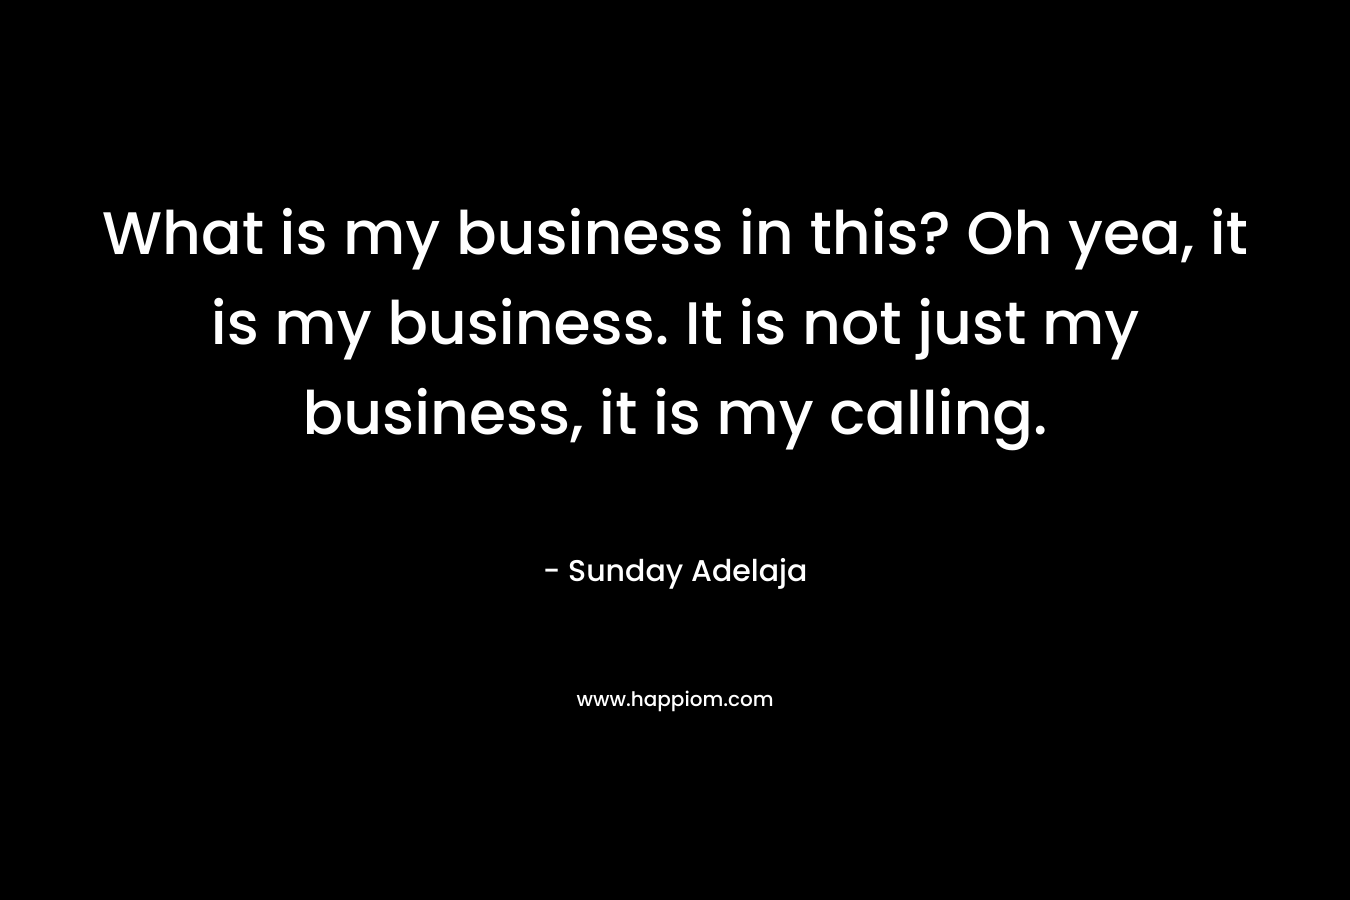 What is my business in this? Oh yea, it is my business. It is not just my business, it is my calling.